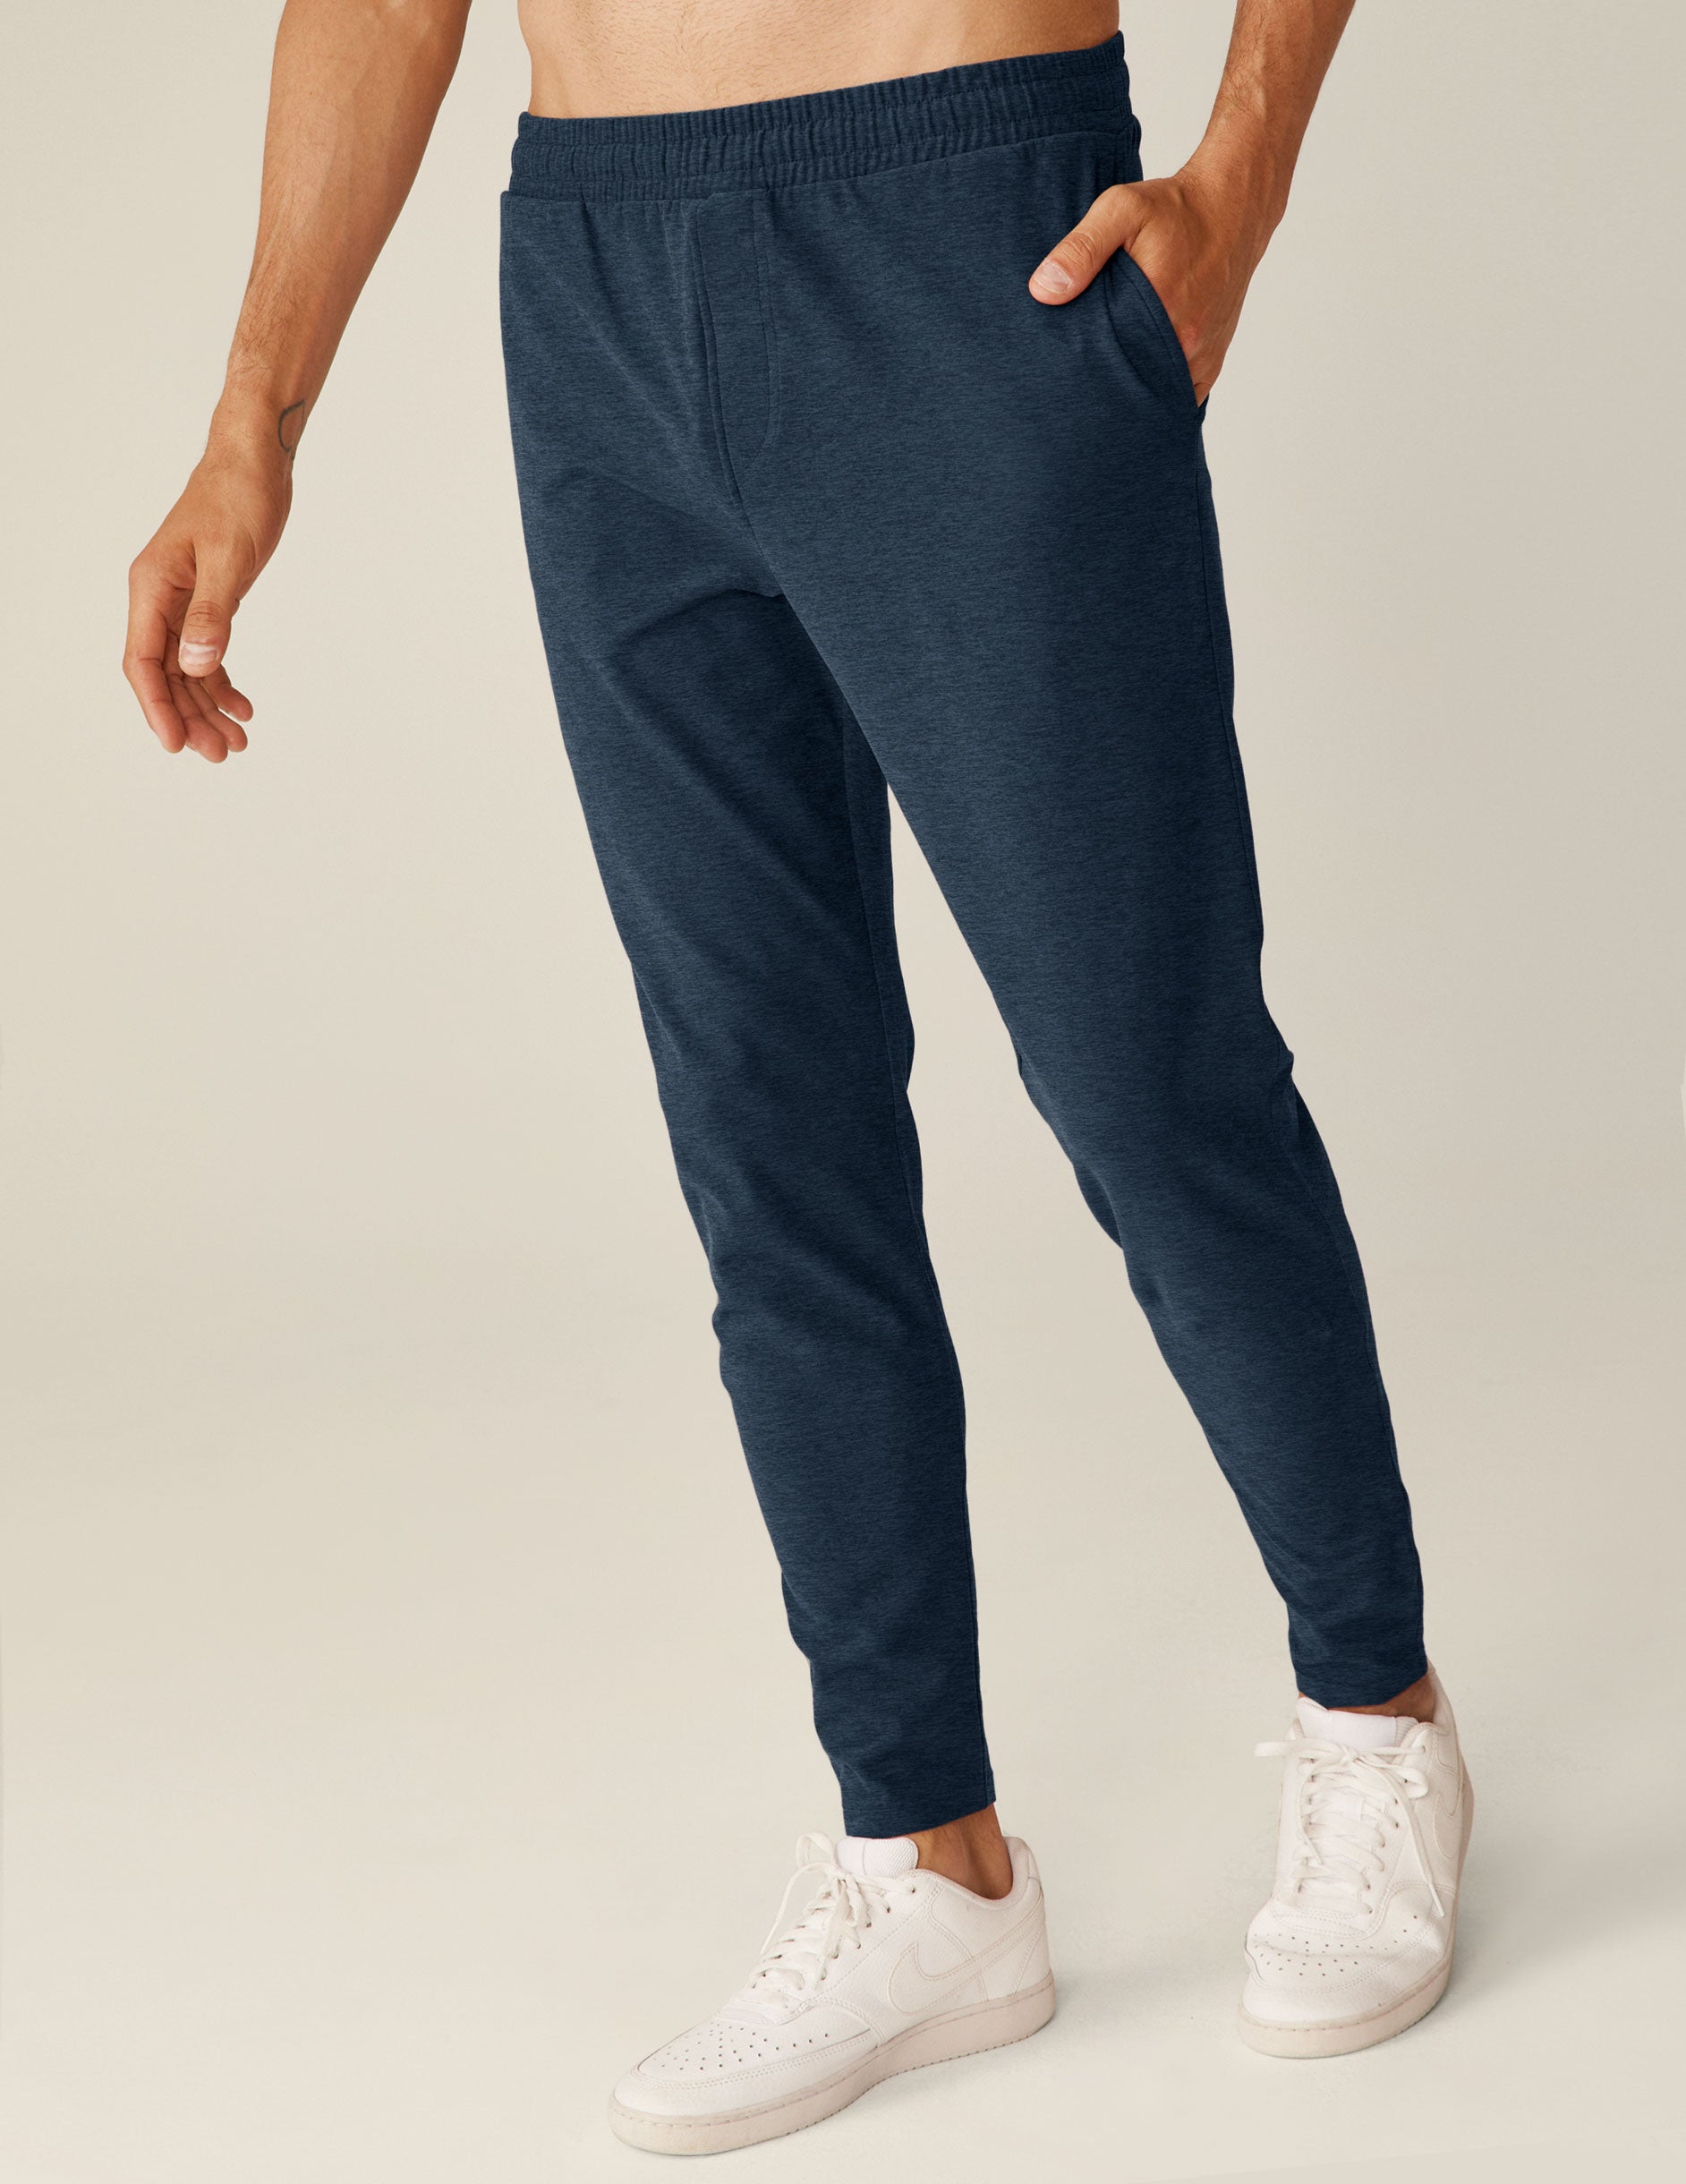 blue men's athleisure pants with an internal drawcord and pockets.